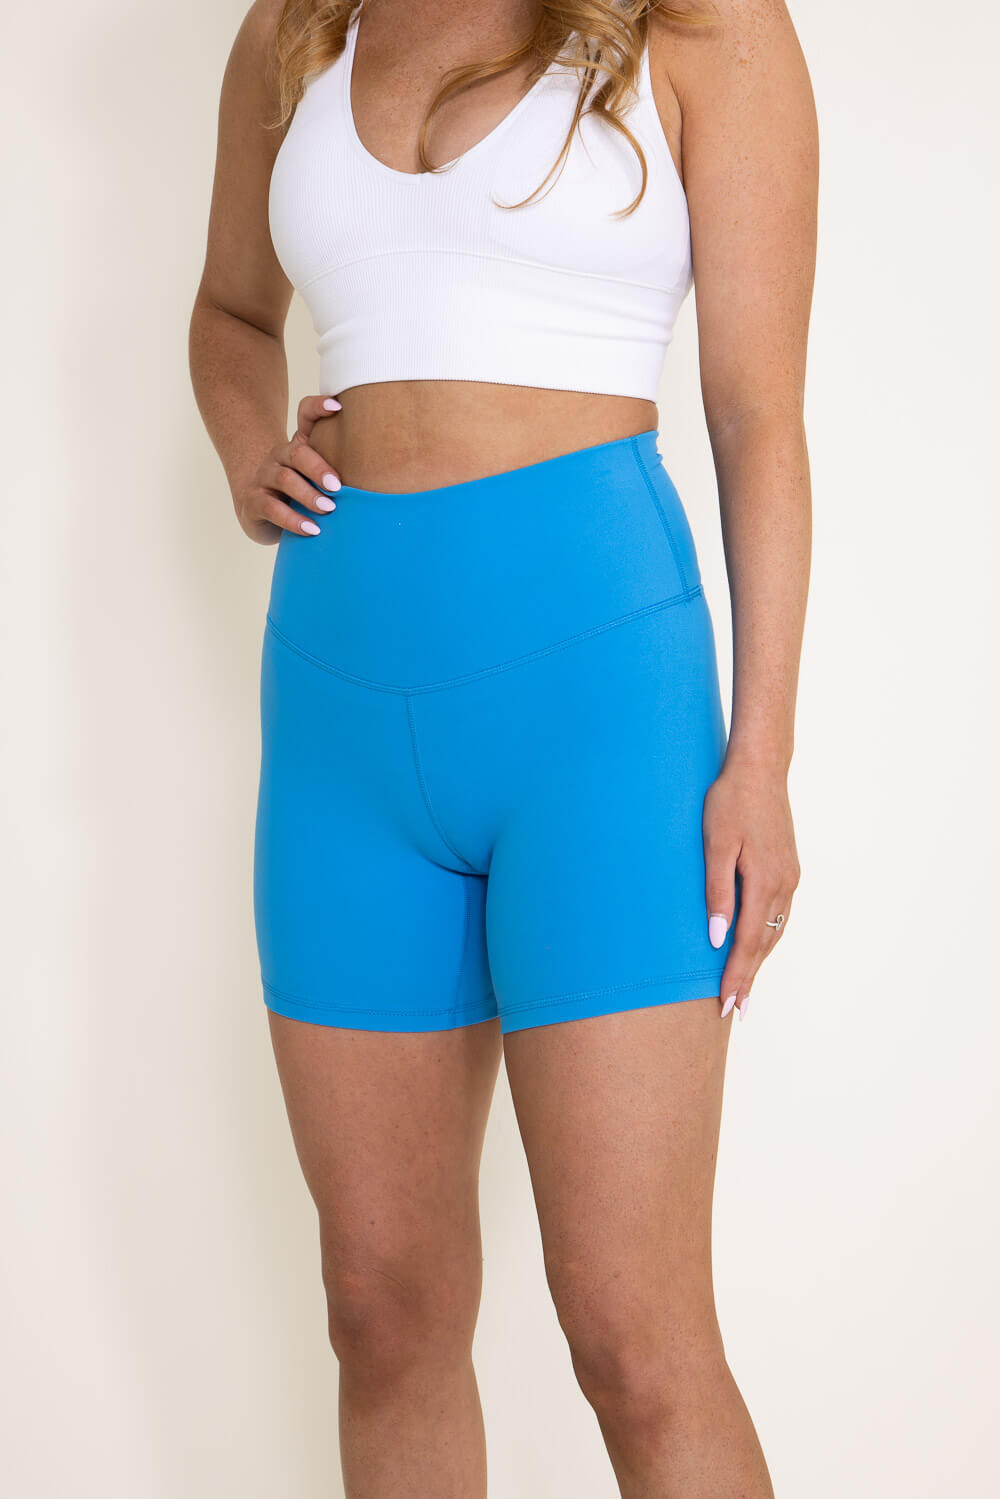 The most comfortable shortsshorts – Northern Baller